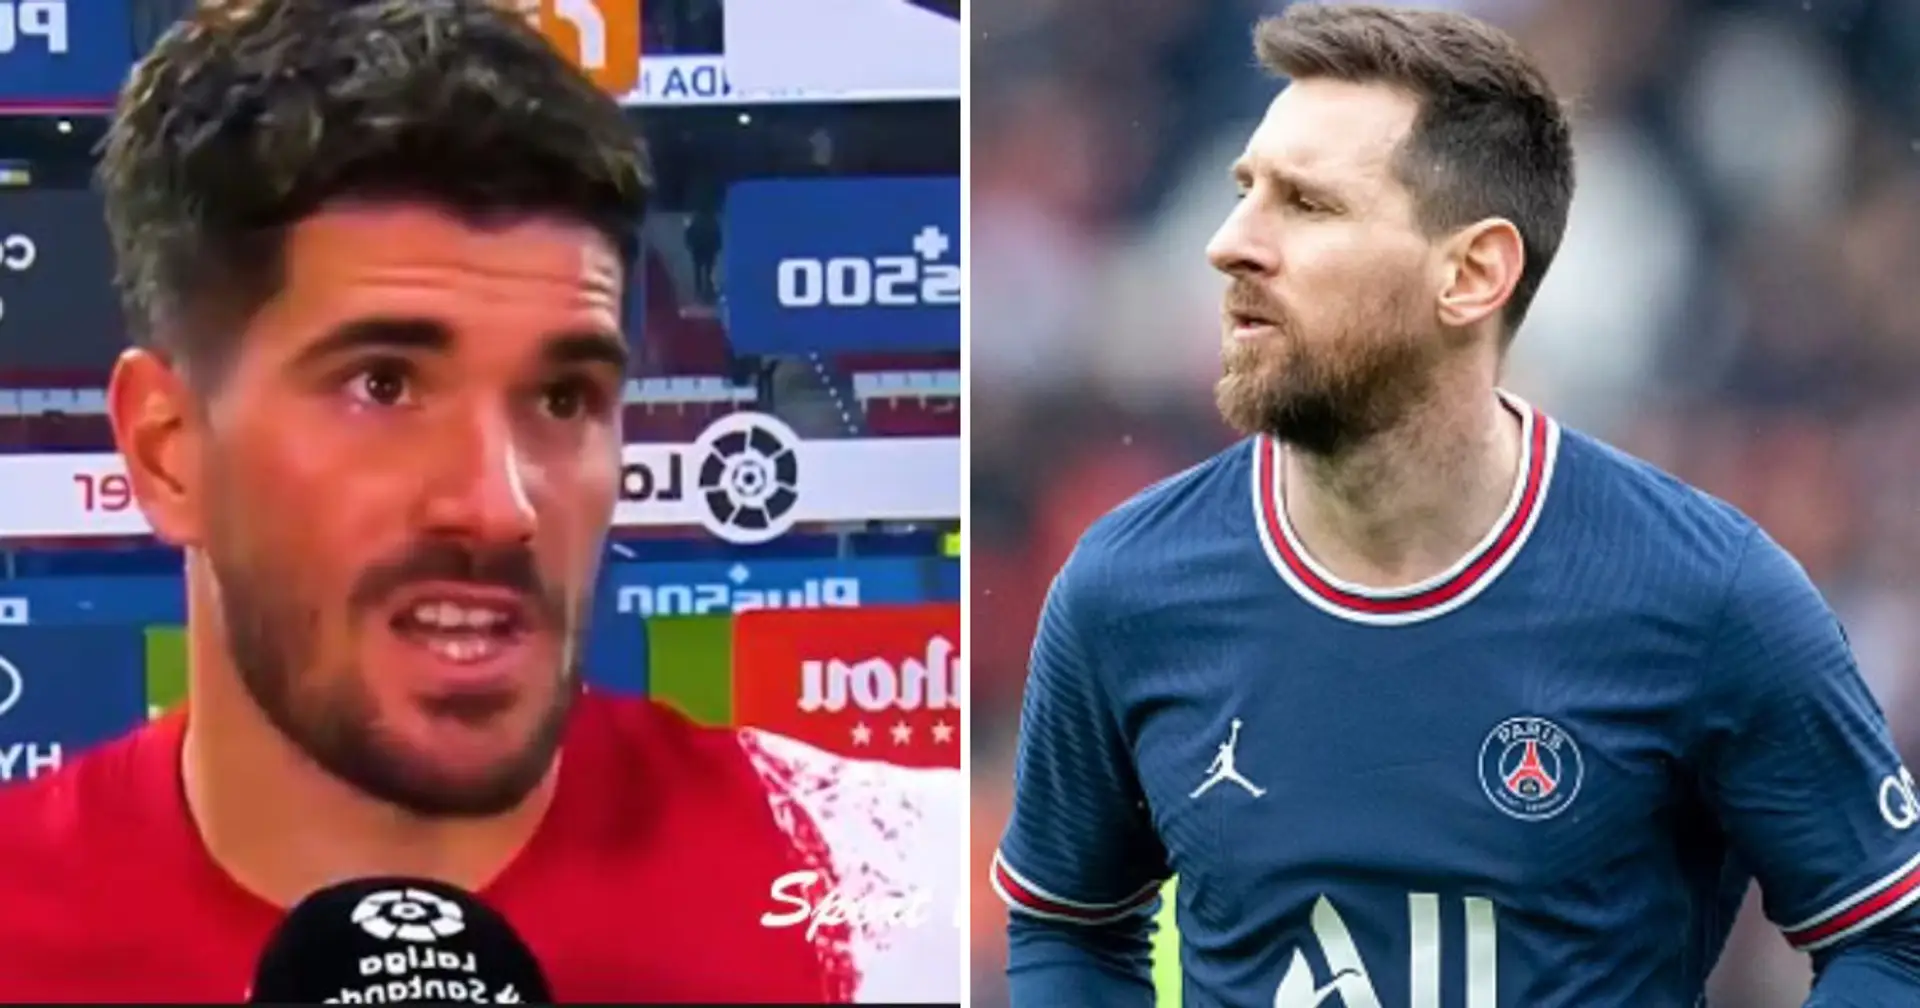 'You can't ever whistle a guy like Messi': Atletico Madrid midfielder slams PSG fans